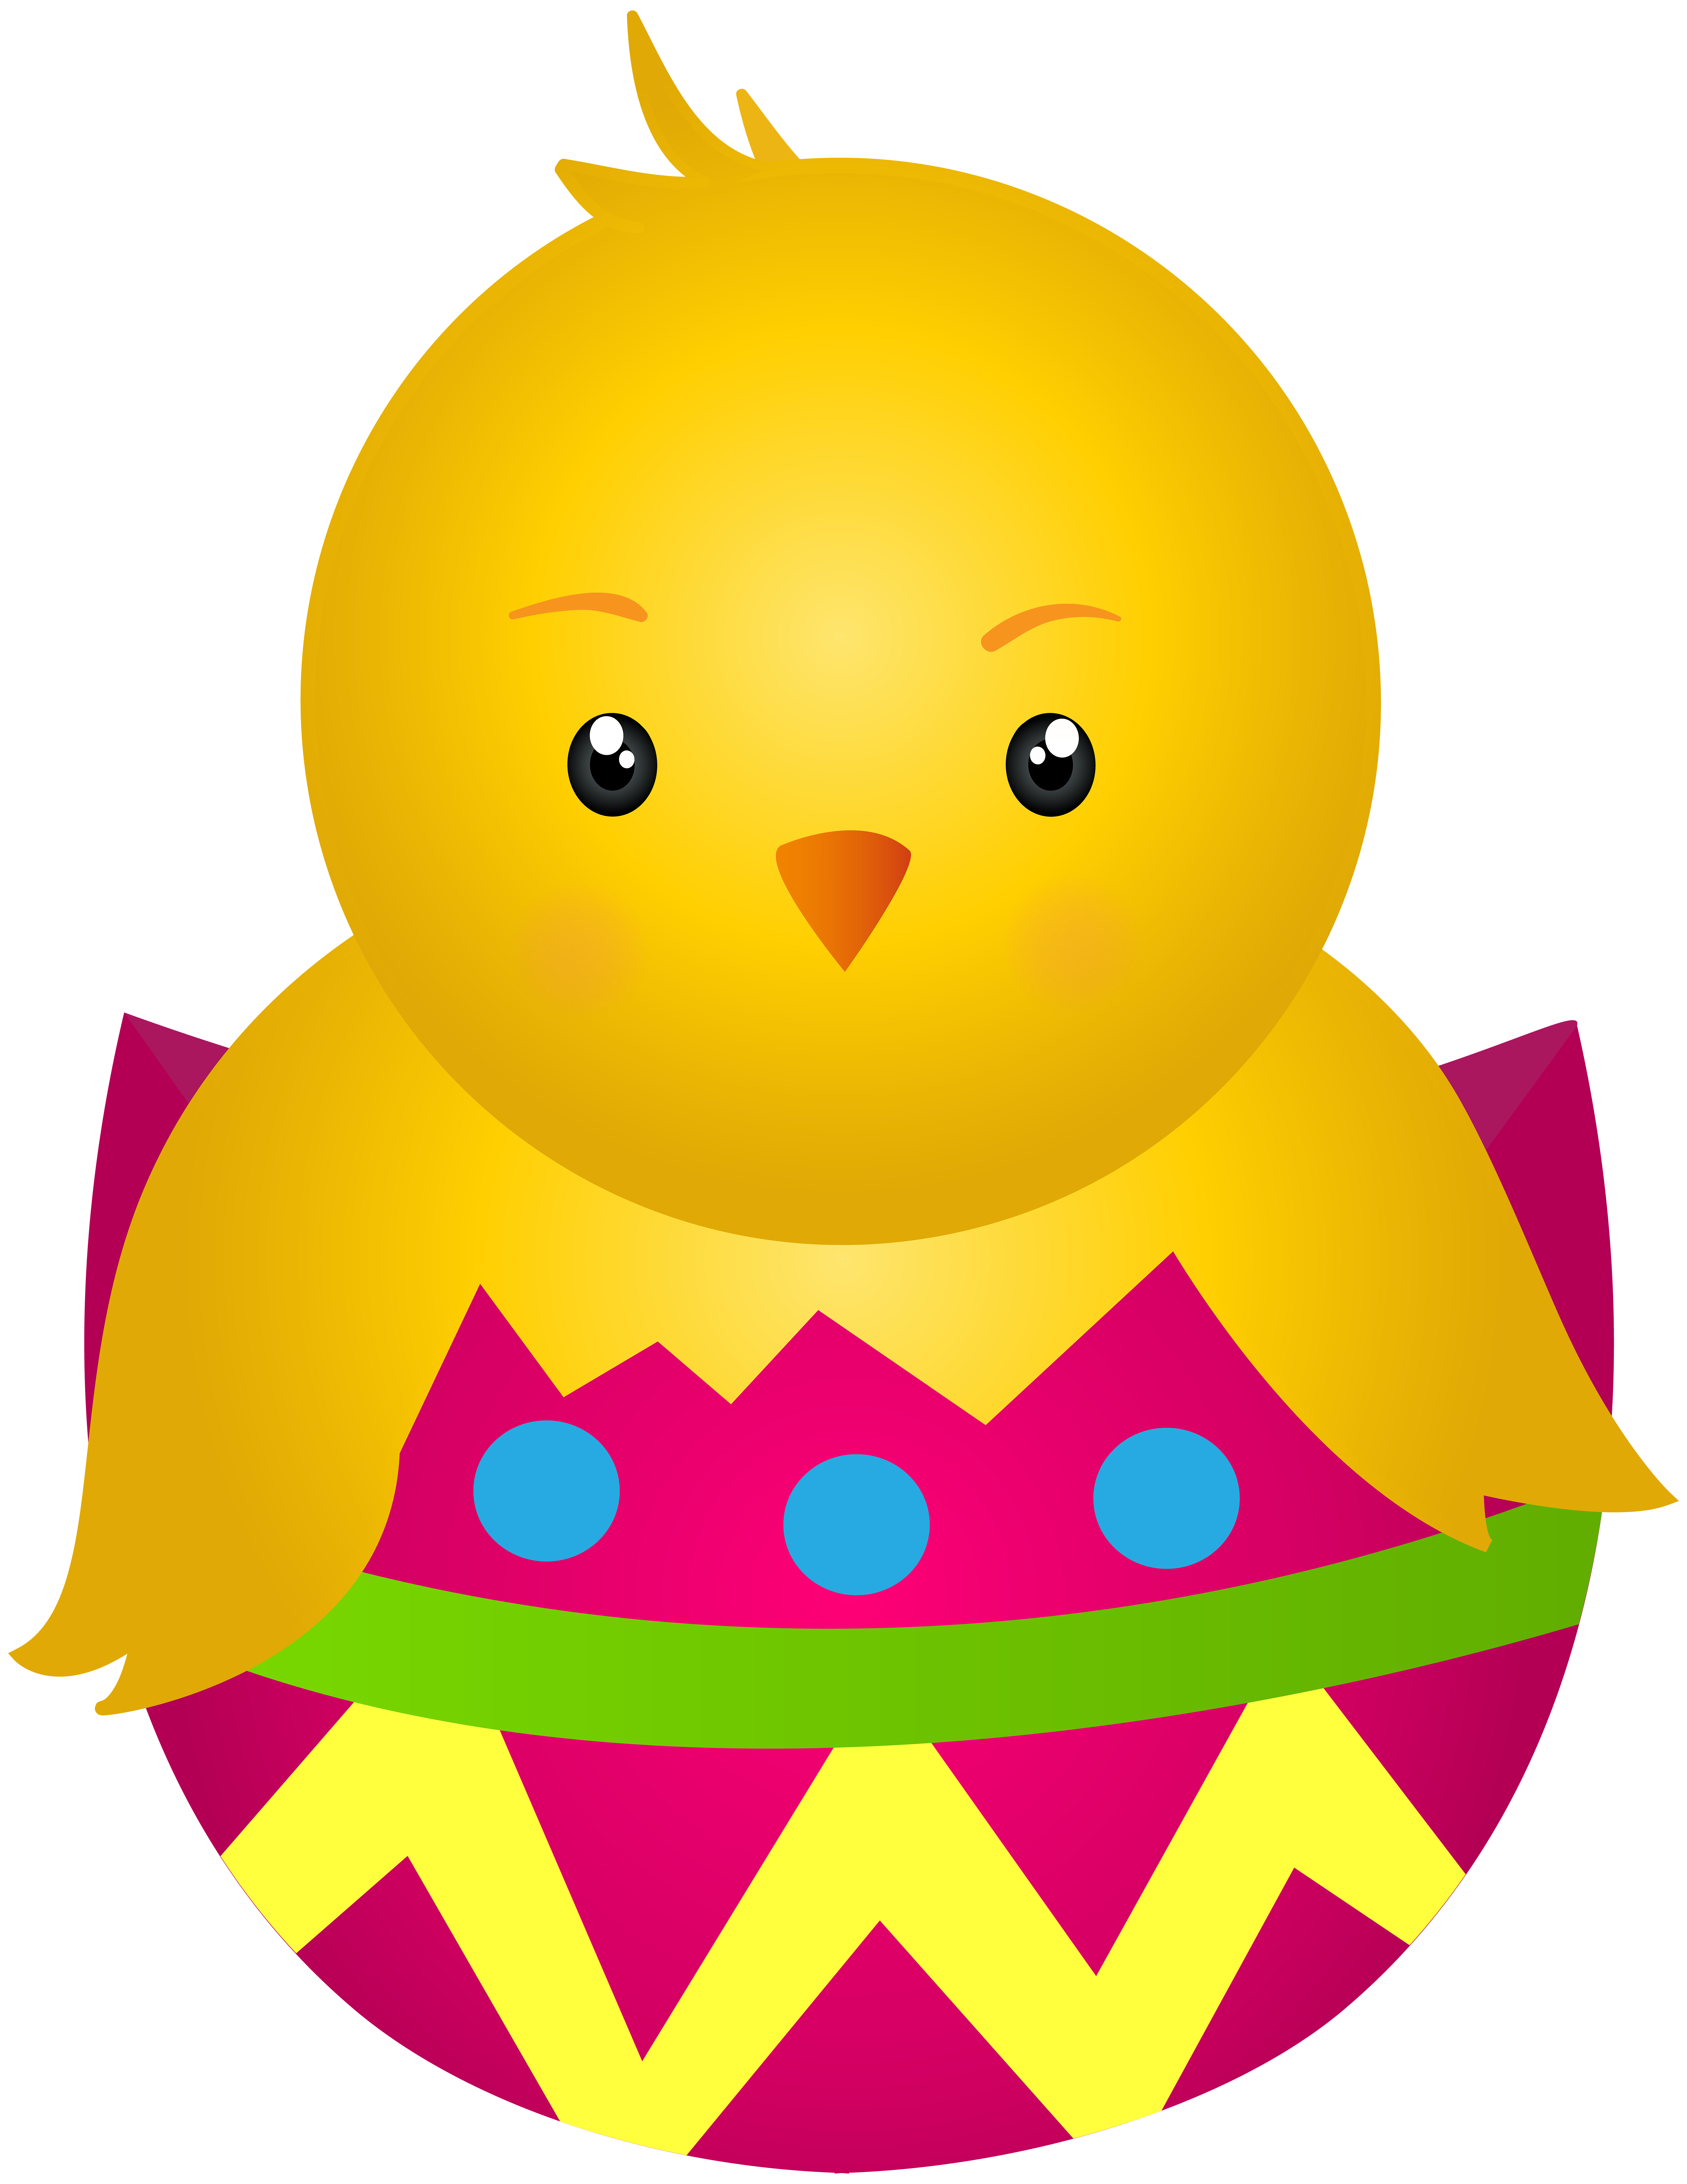 Egg Chicken Easter Bunny Free Transparent Image HD Clipart